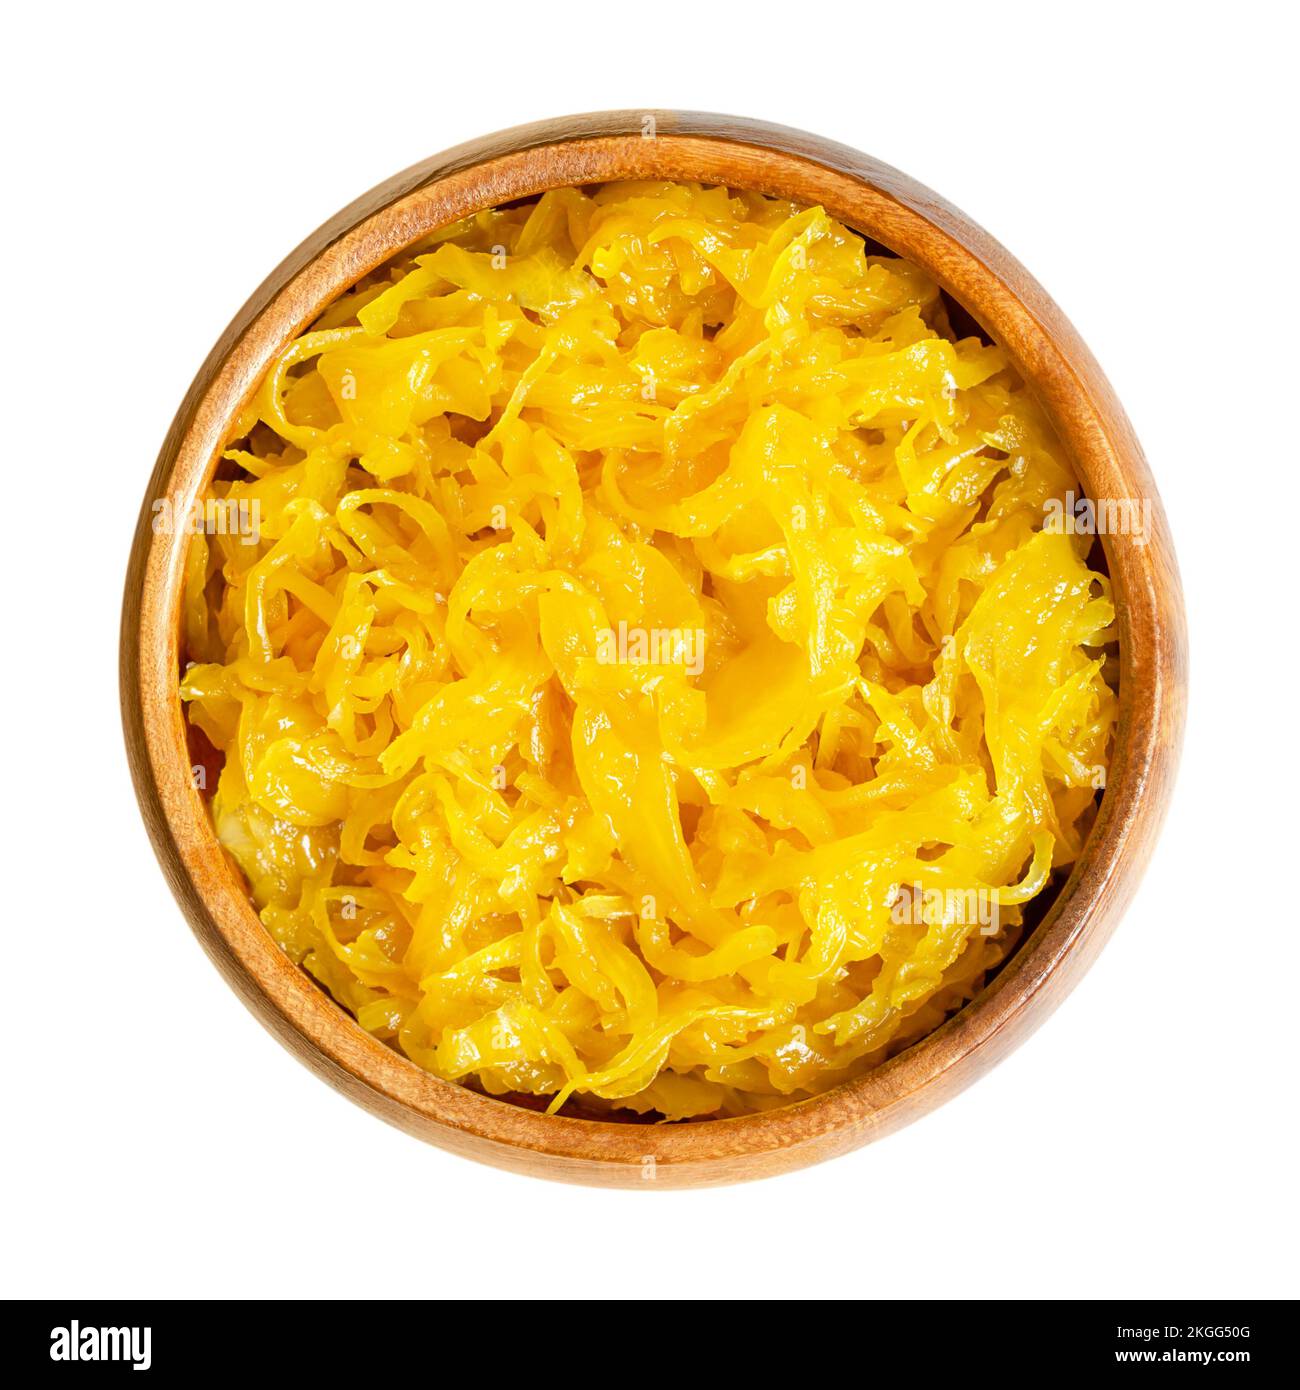 Sweet golden curry mango sauerkraut, in a wooden bowl. Finely cut cabbage, fermented by lactic acid bacteria, with added mango puree and curry powder. Stock Photo